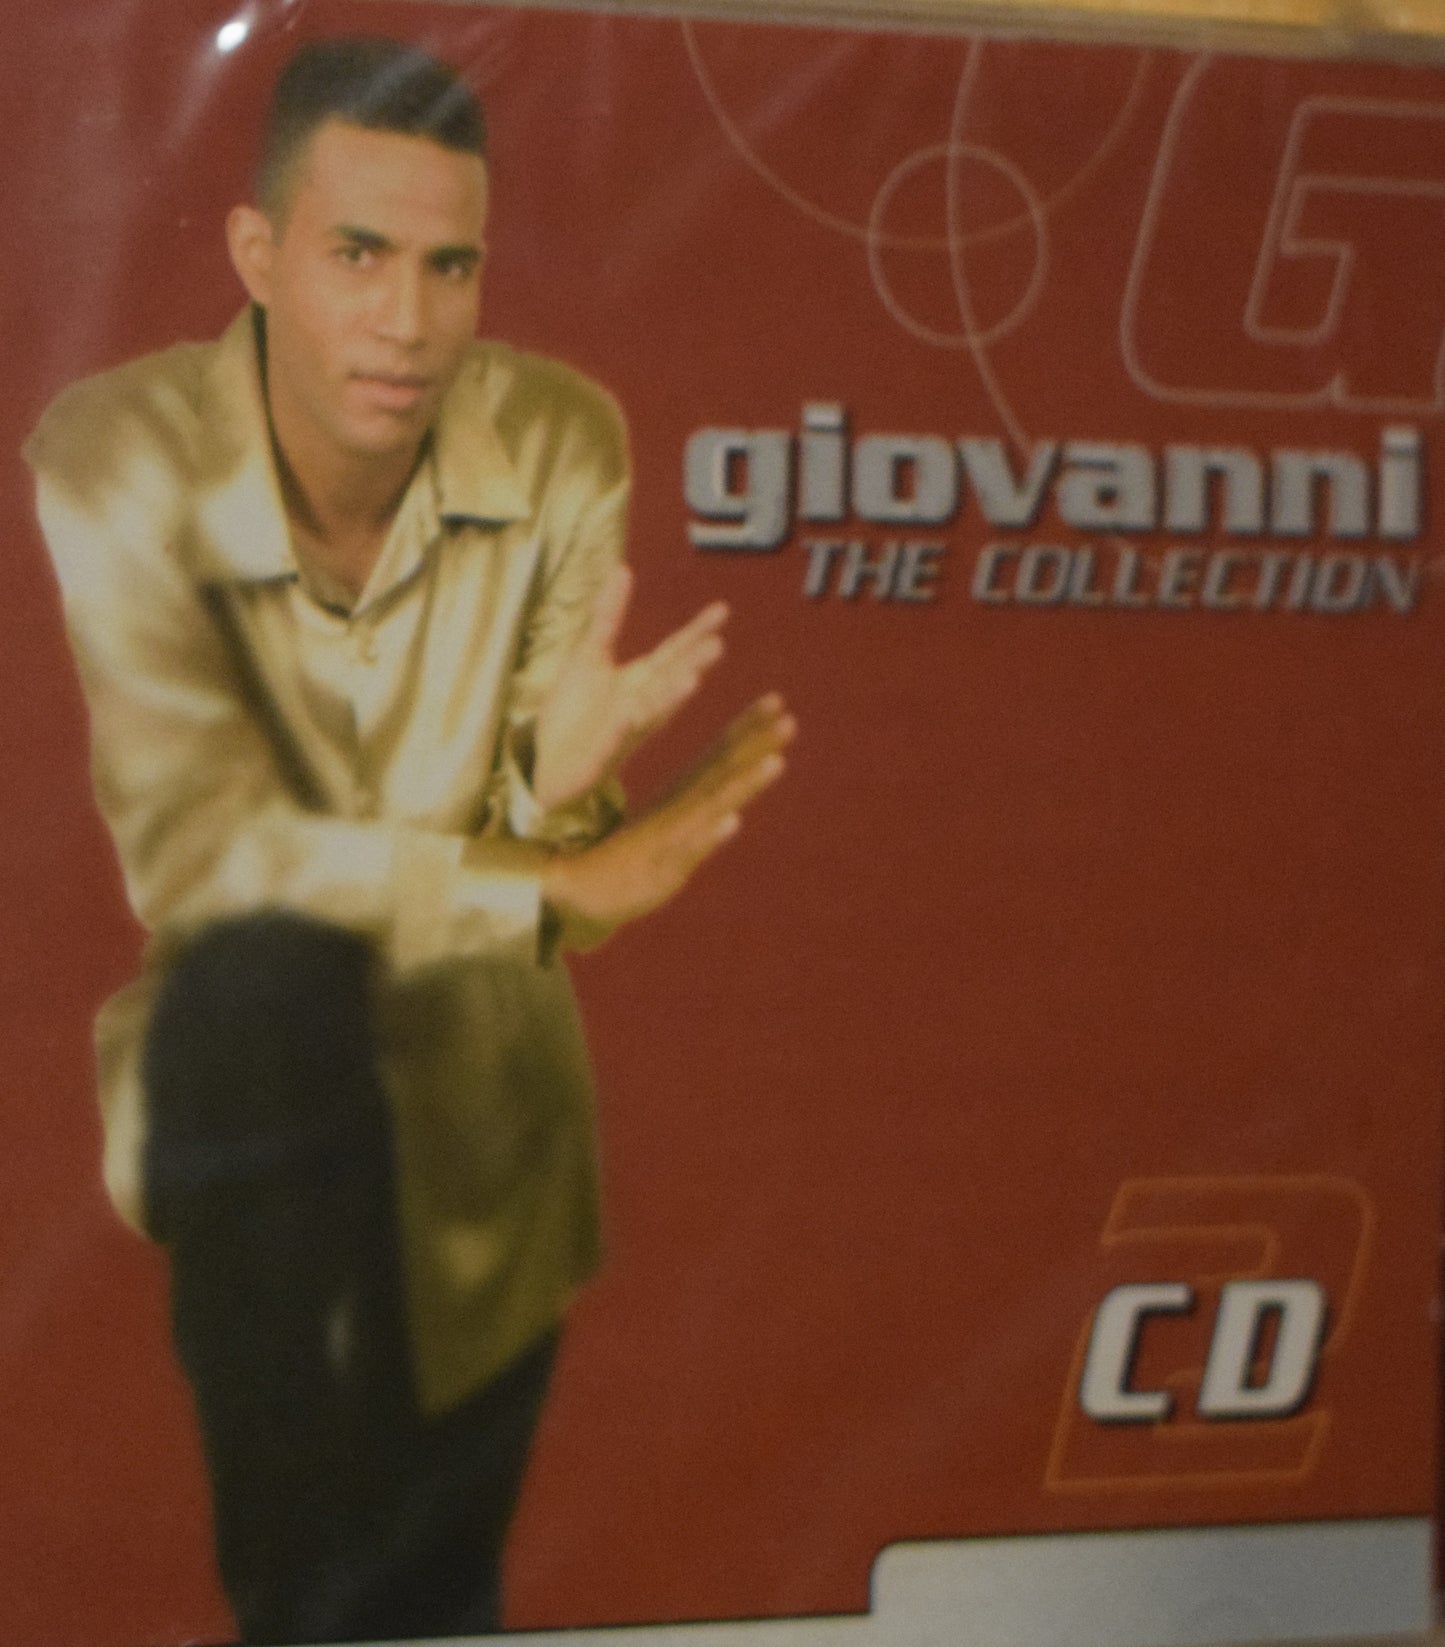 CD – The Collection CD 2 – Giovanni